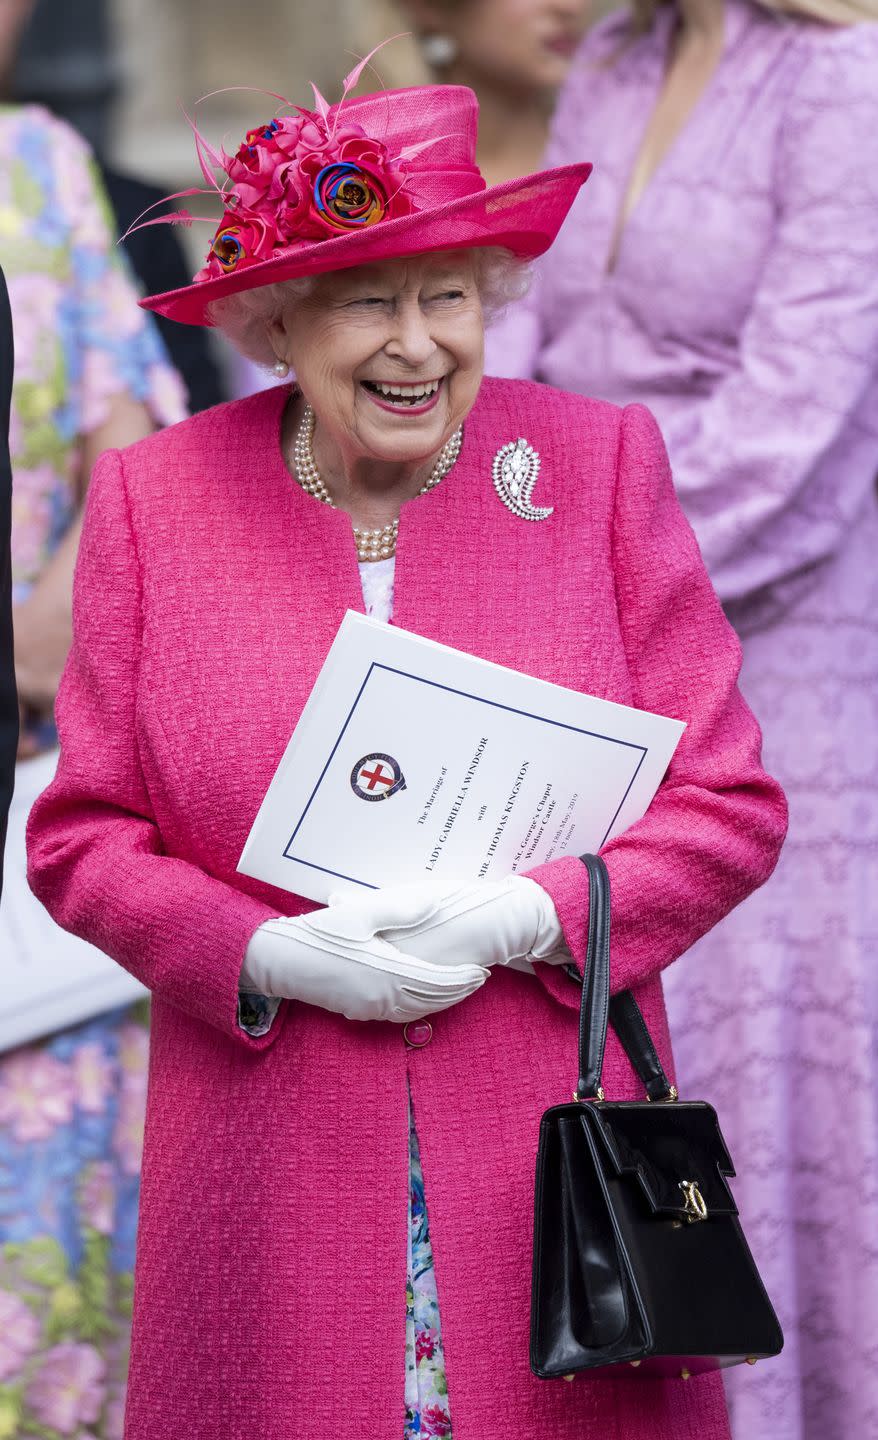 Queen Elizabeth enjoying herself as she leaves the ceremony